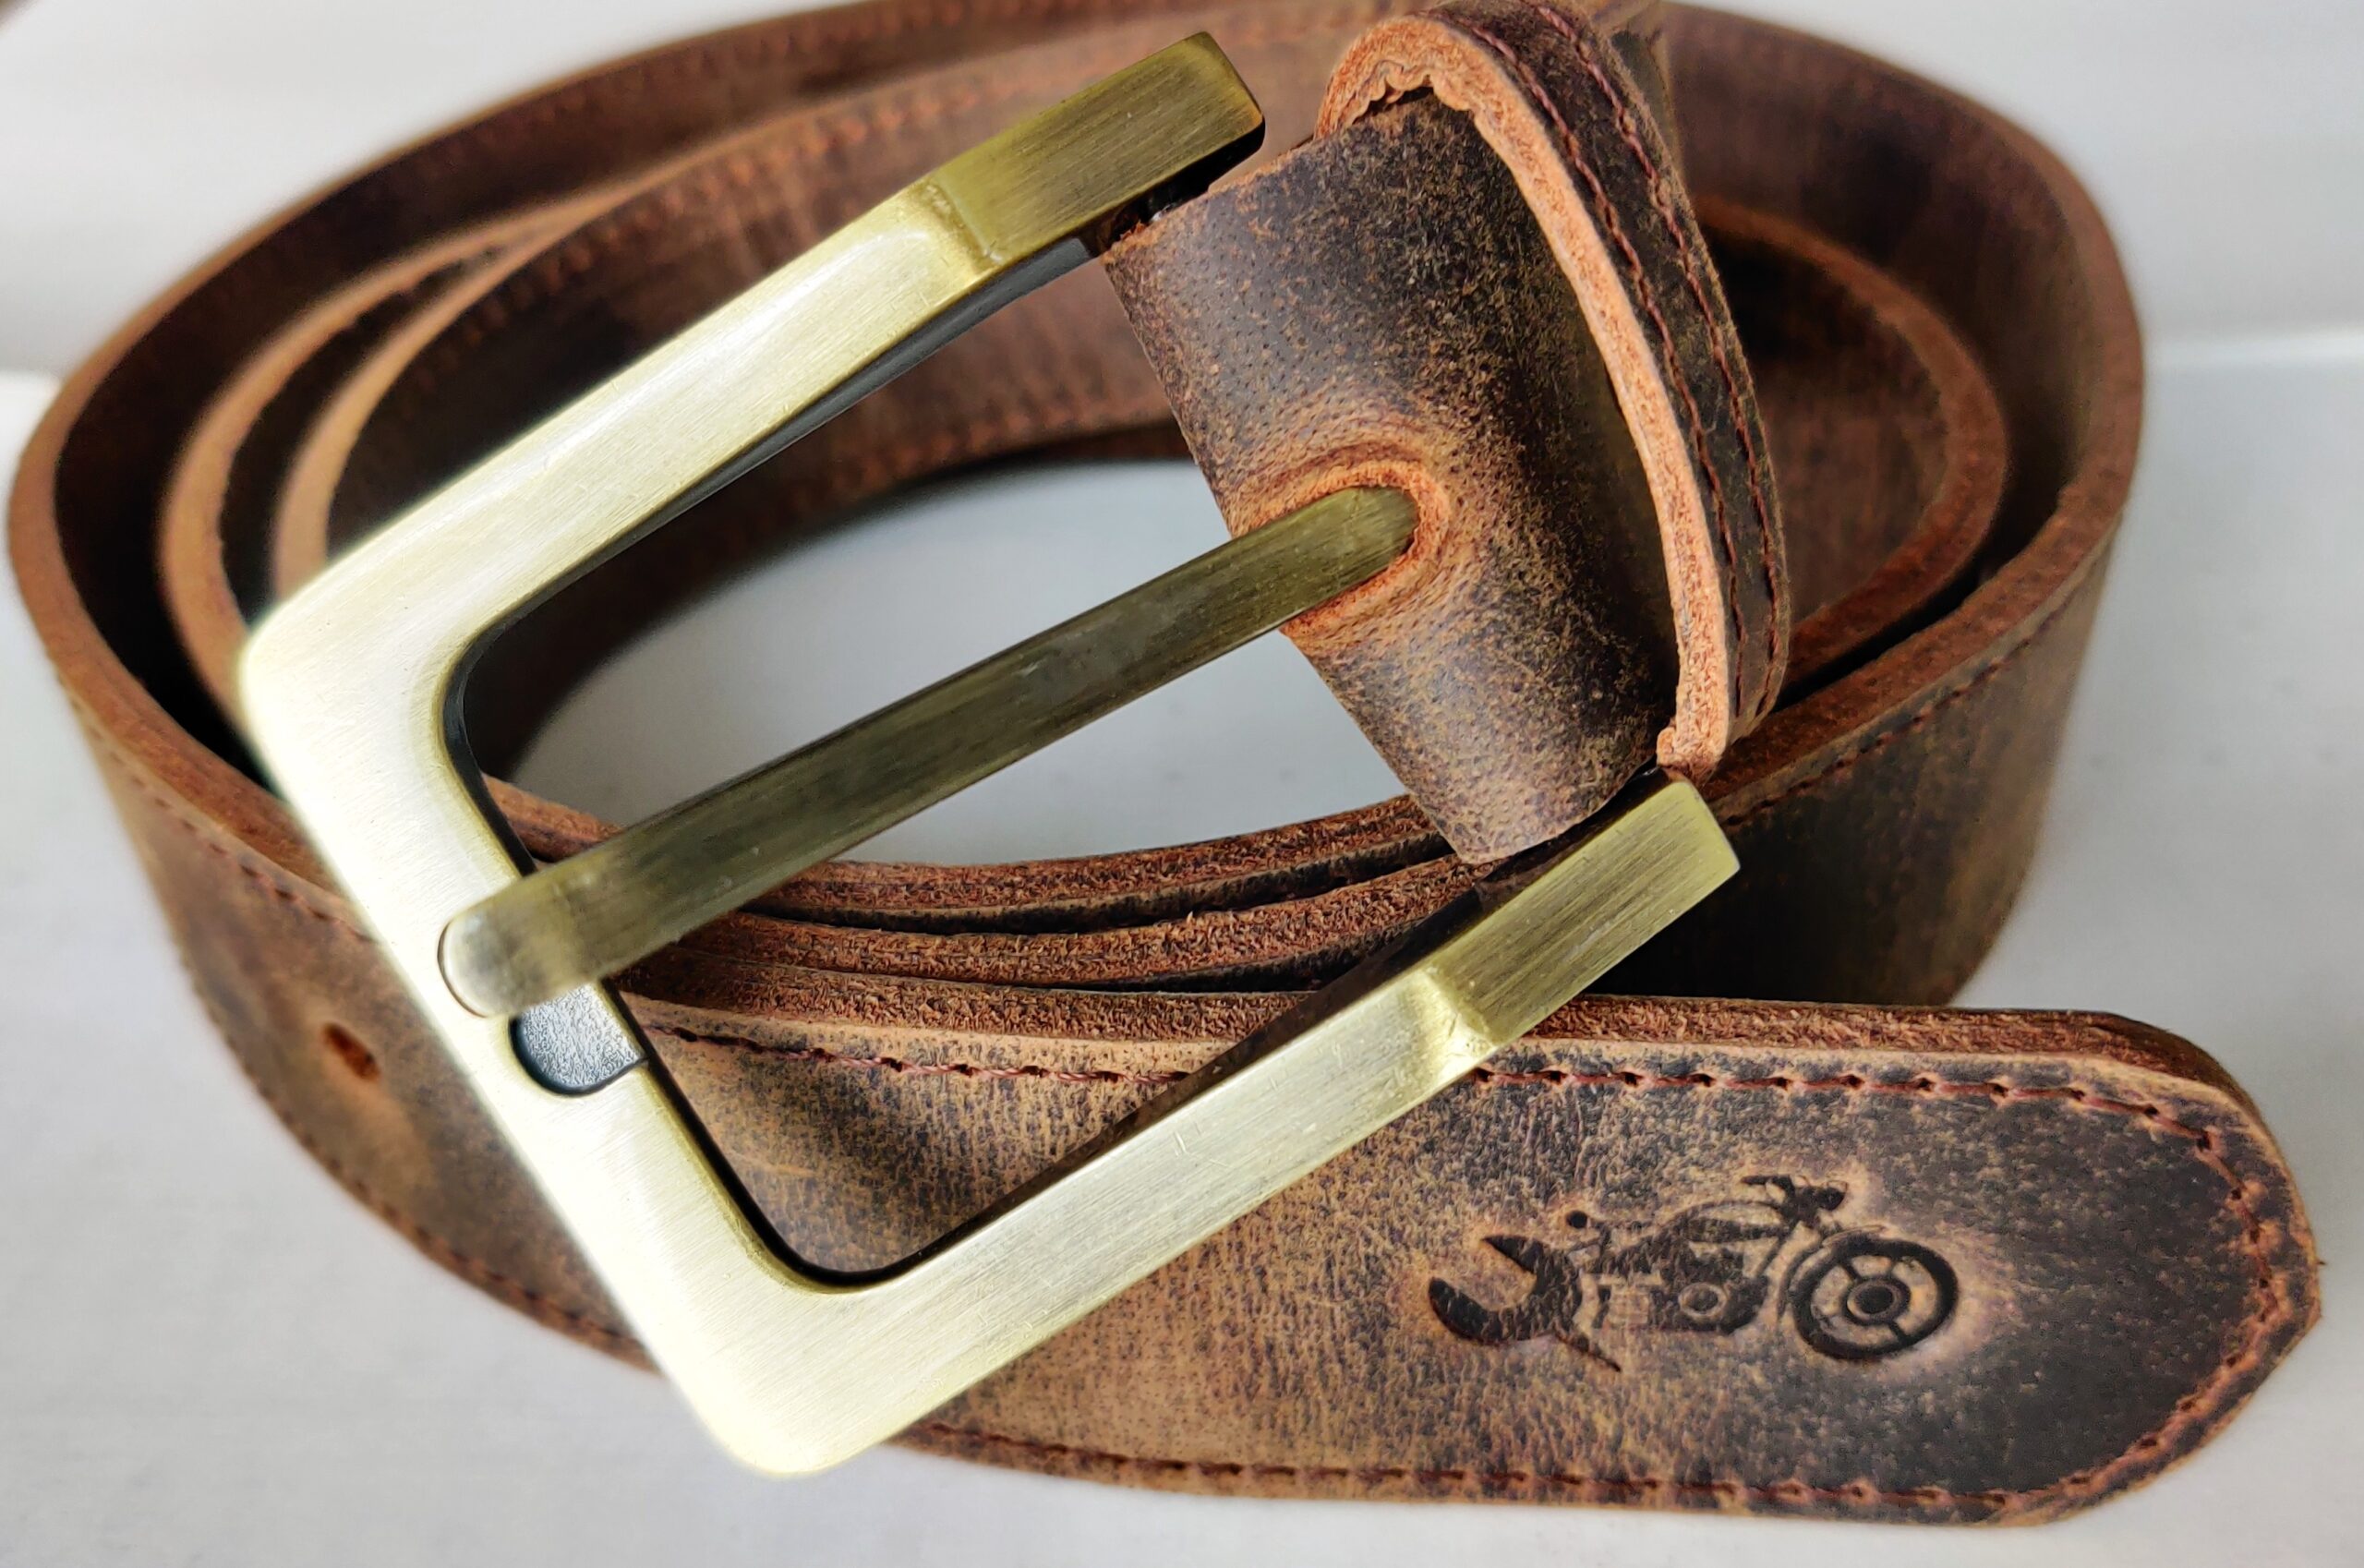 leather belt for